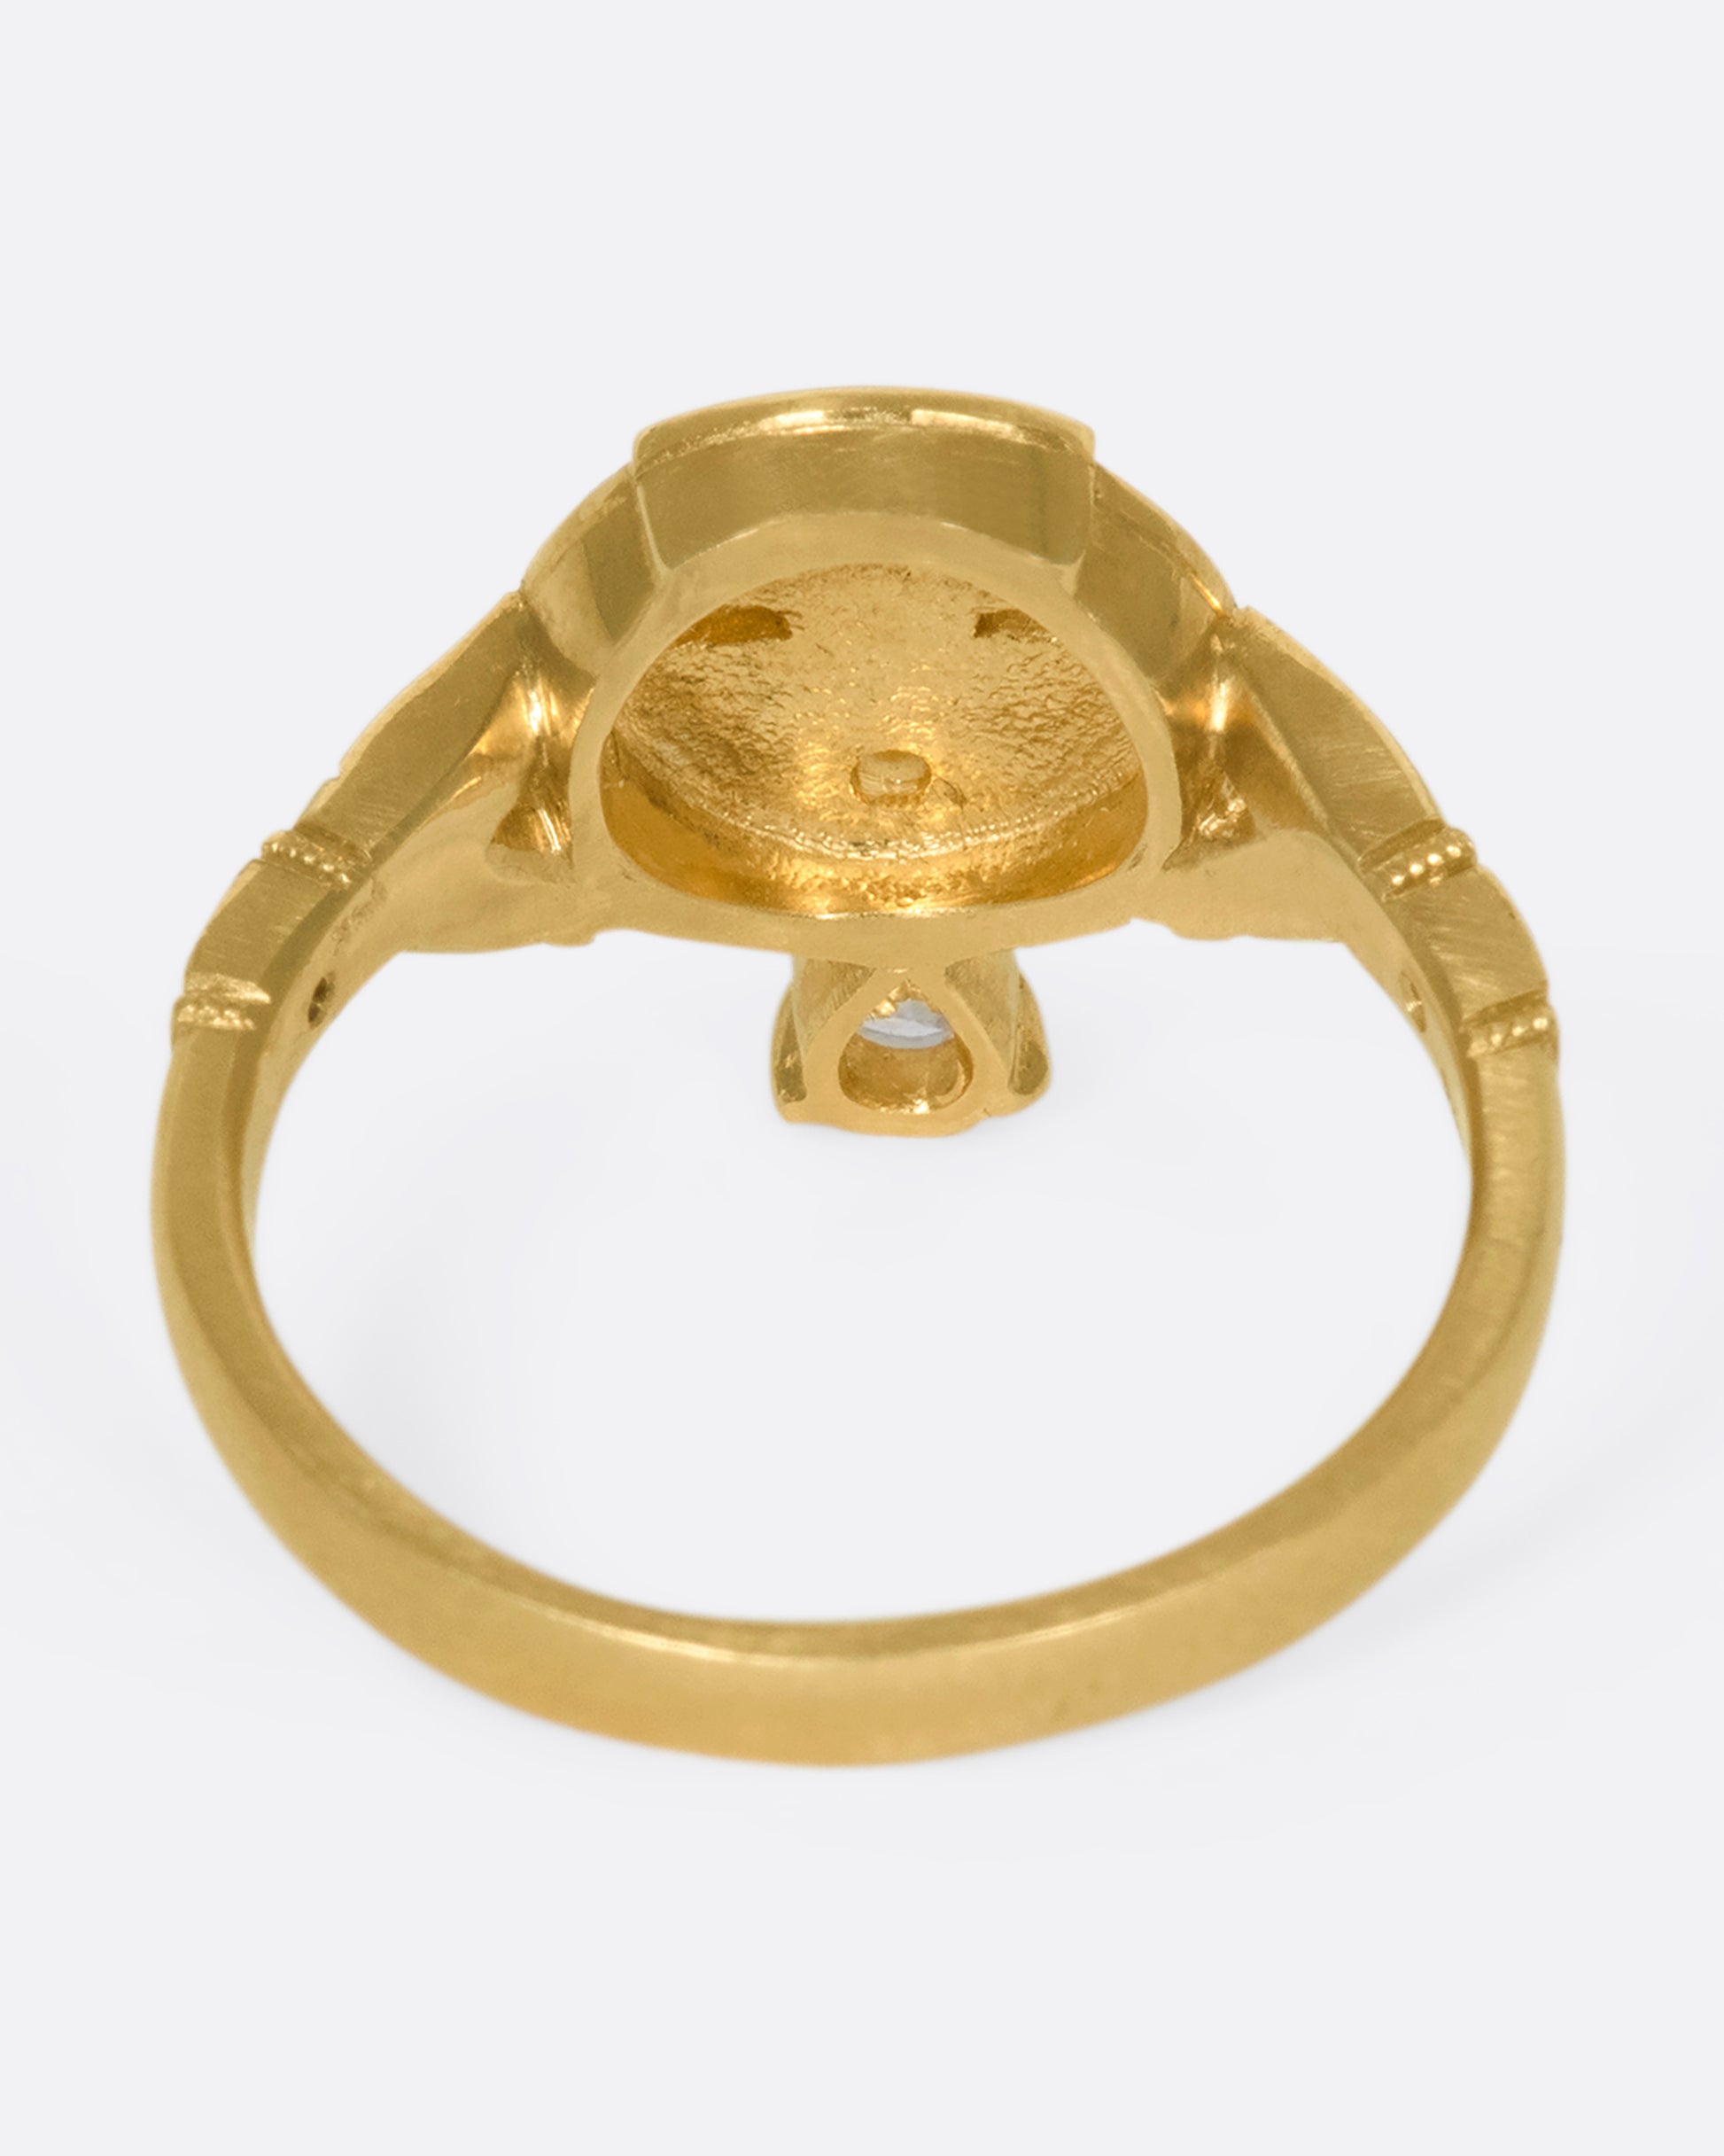 An underside view of a gold ring with a face and a pear shaped diamond tongue.